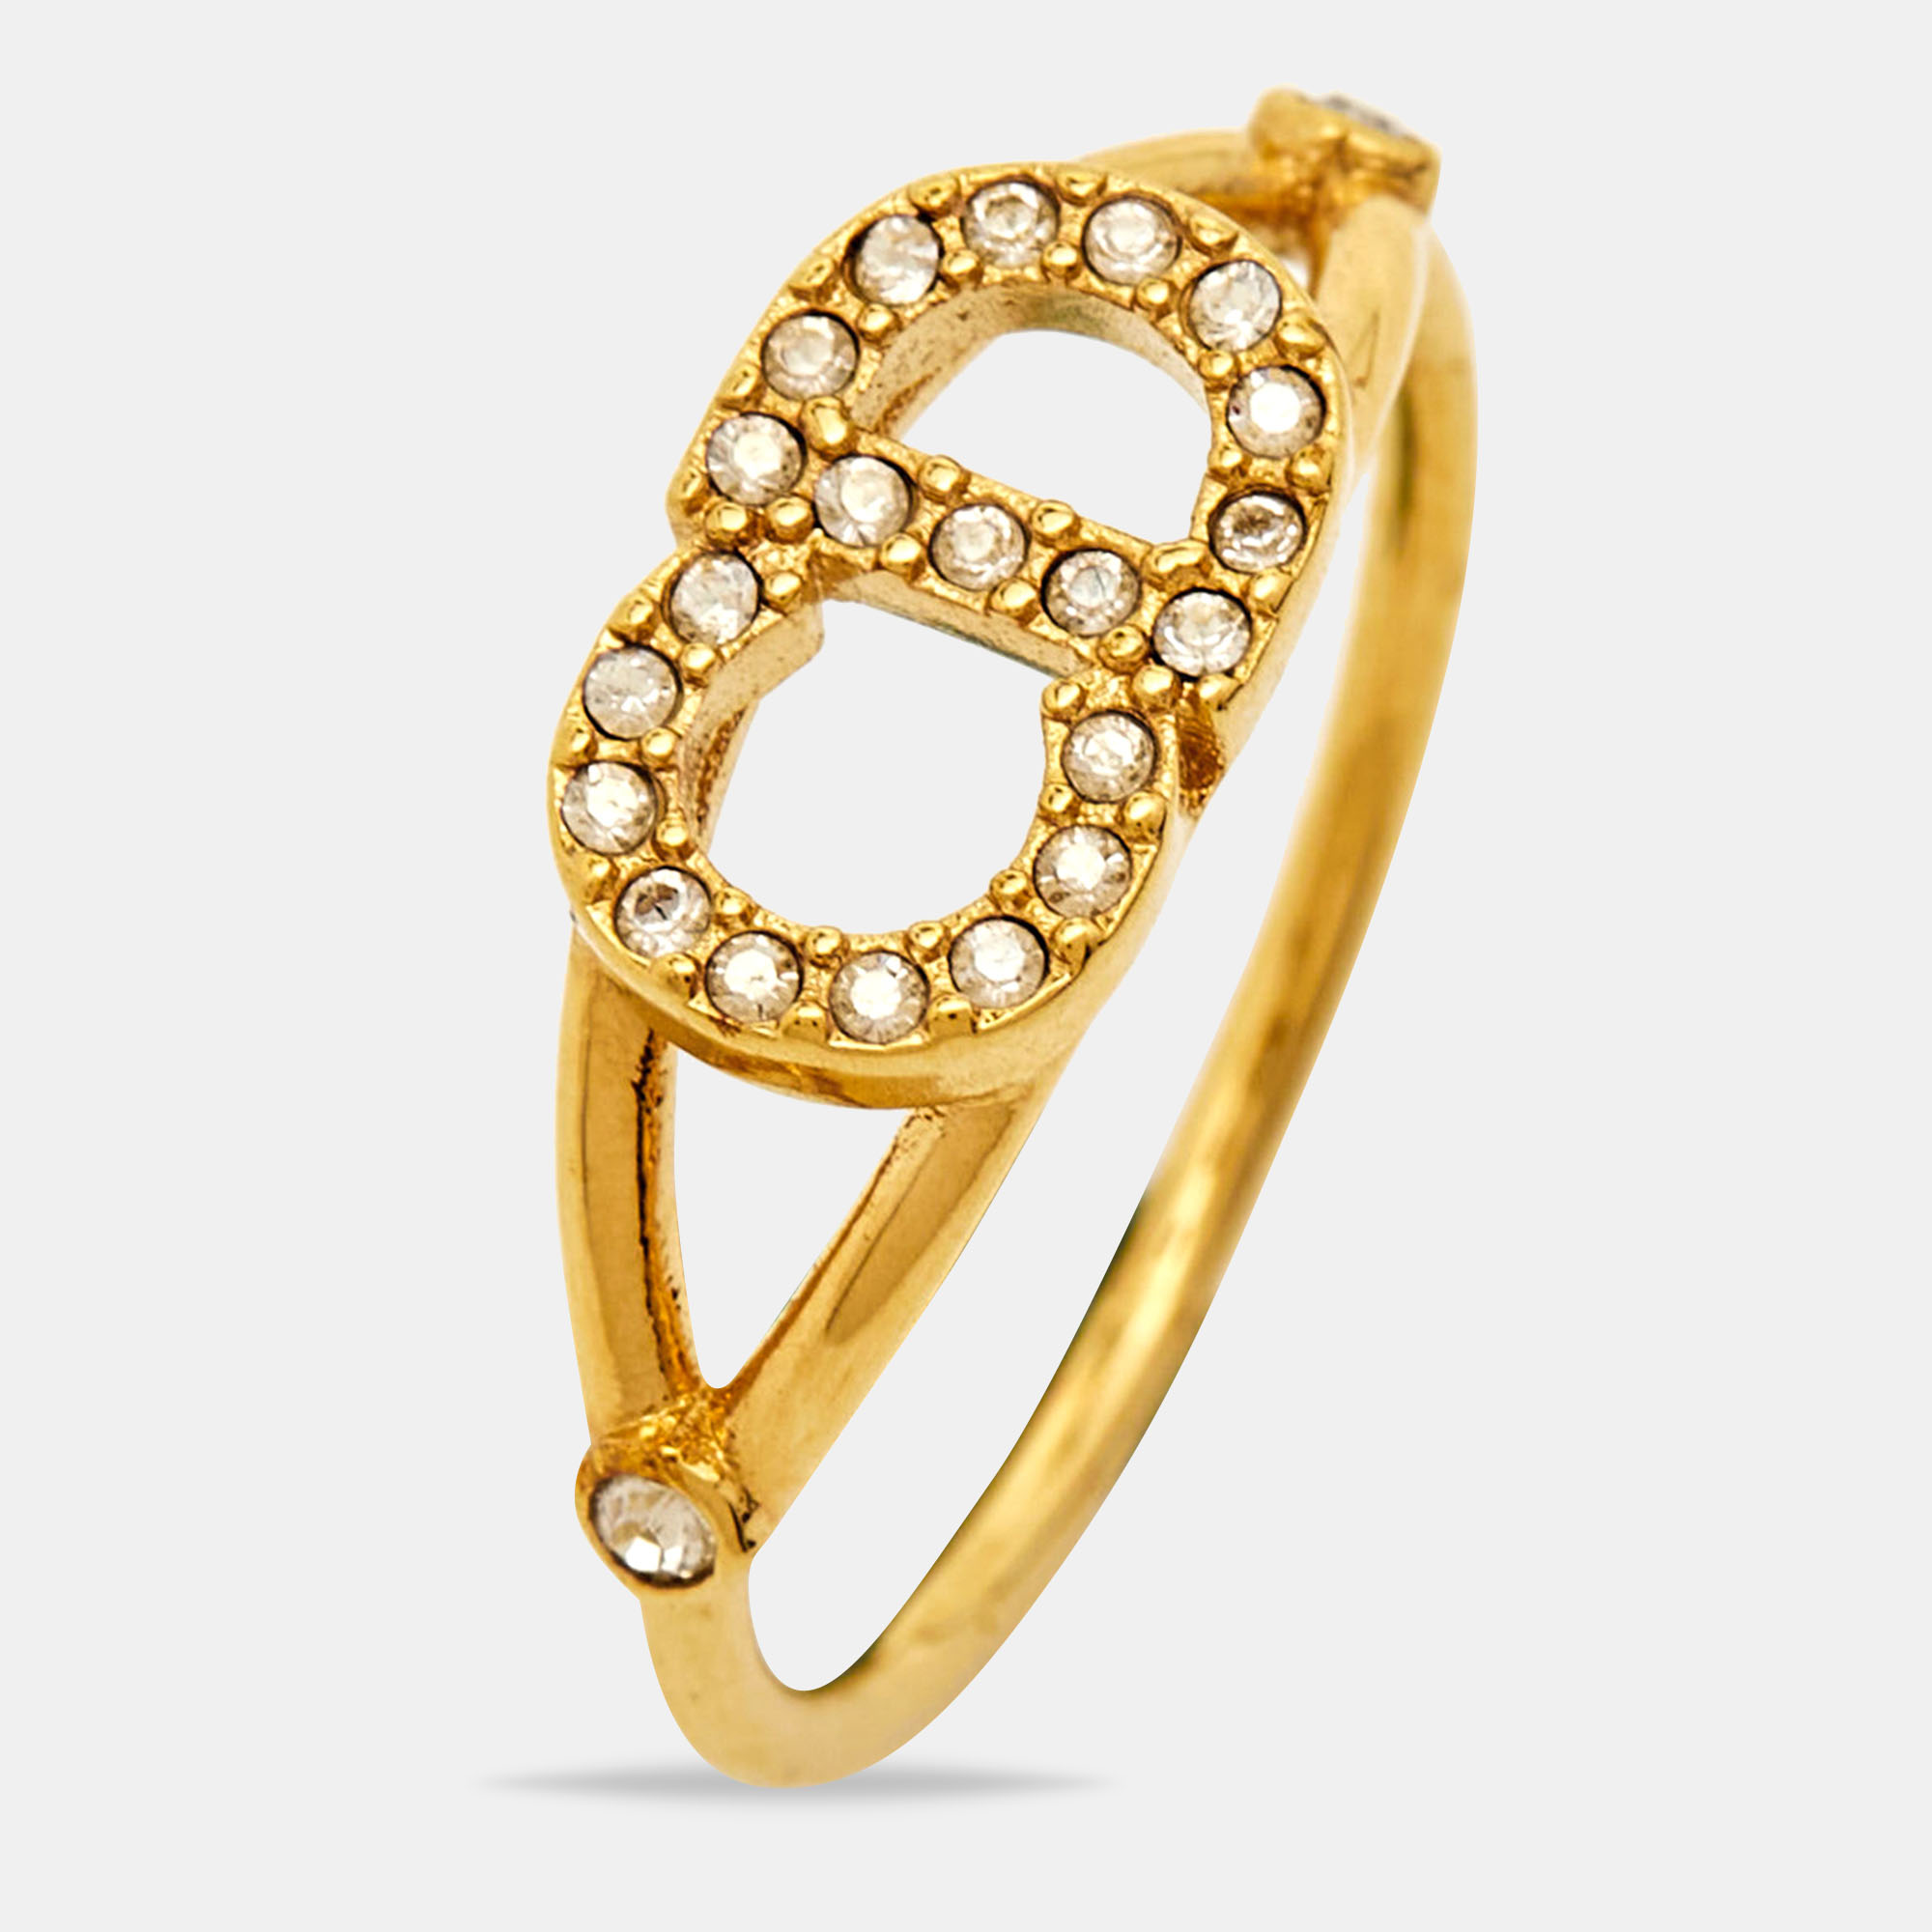 Dior Clair D Lune CD Crystal Gold Tone Ring Size 53